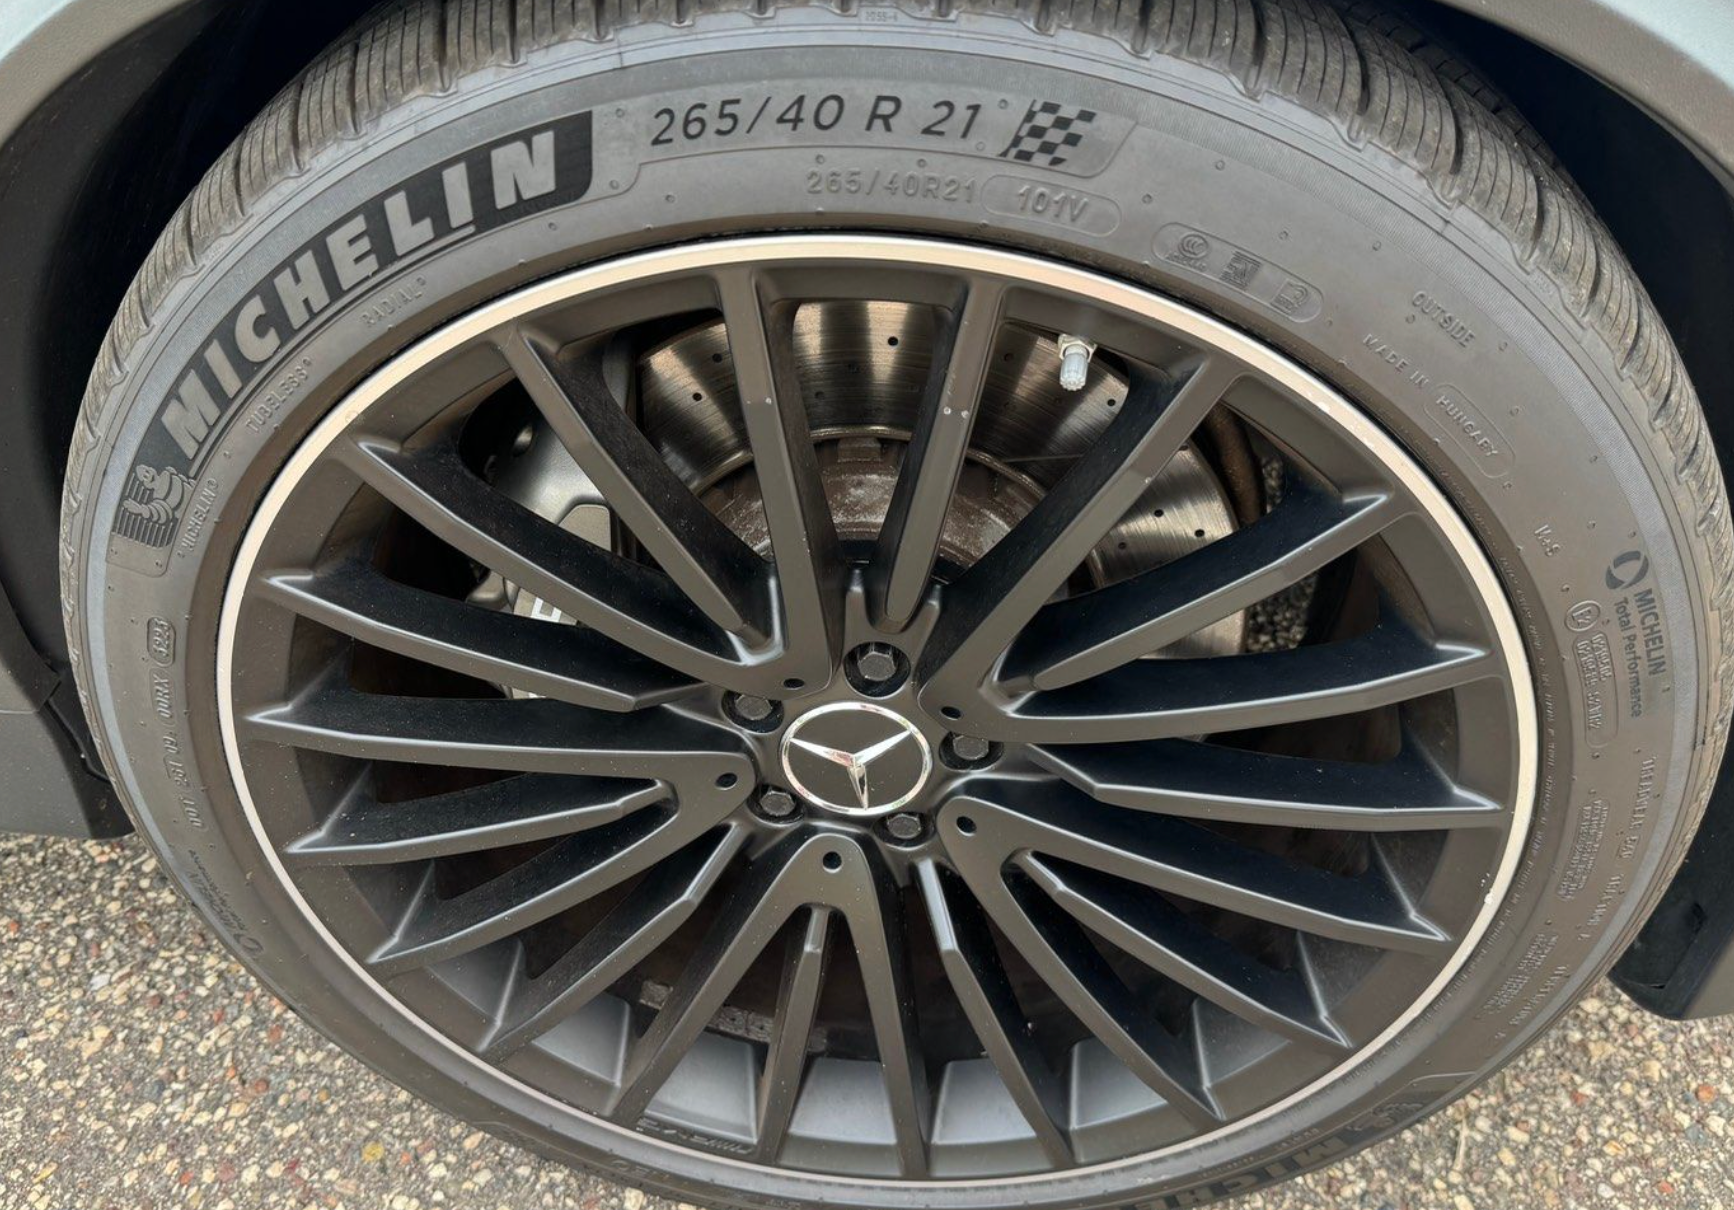 Wheels and Tires/Axles - 2020 GLC 63 Wheels - (Willing to trade or buy) - Used - -1 to 2025  All Models - Encino, CA 91436, United States